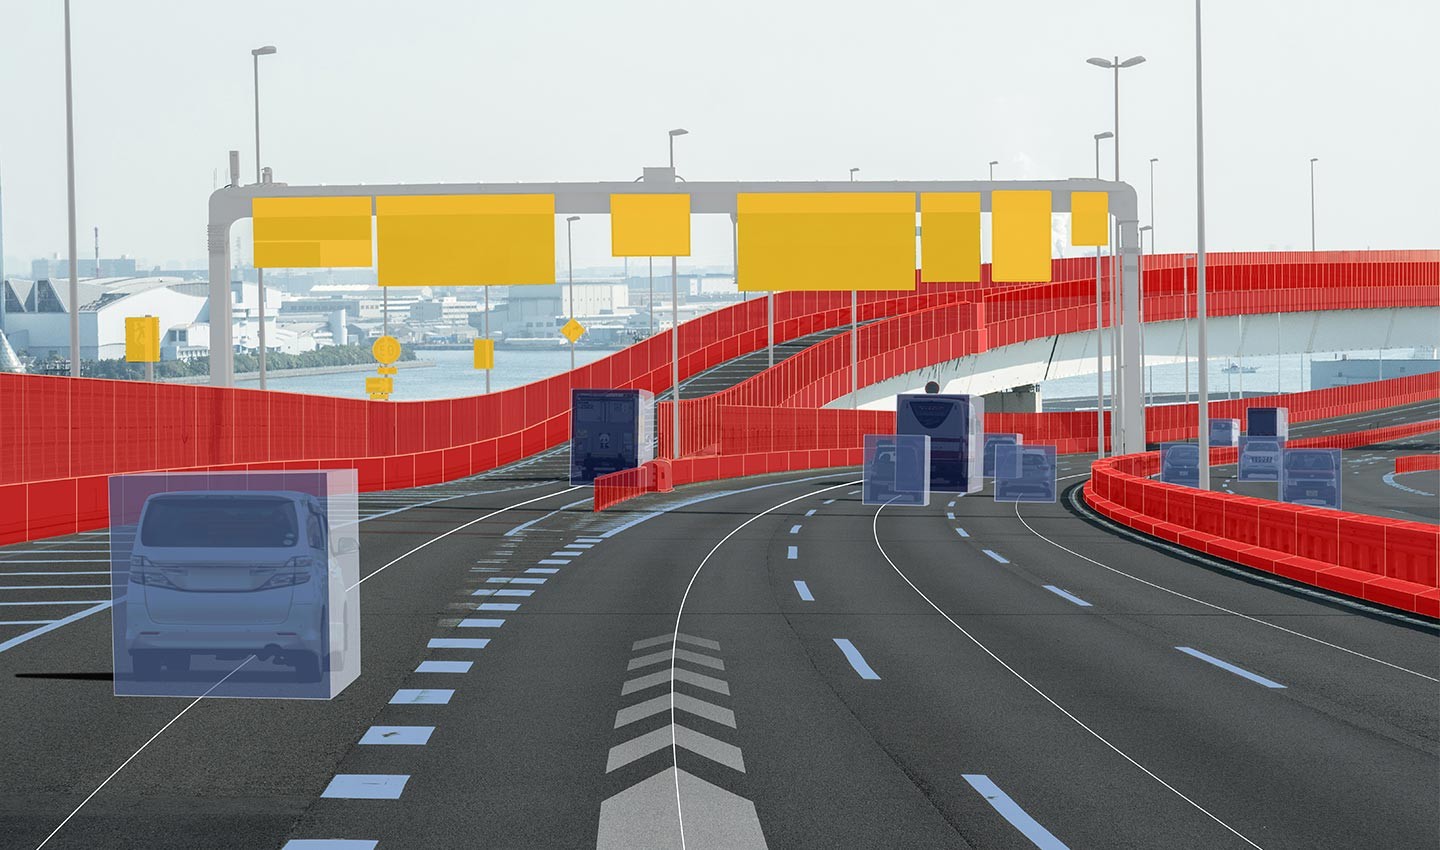 The TomTom HD Map delivers highly accurate, up-to-date and realistic representations of the road